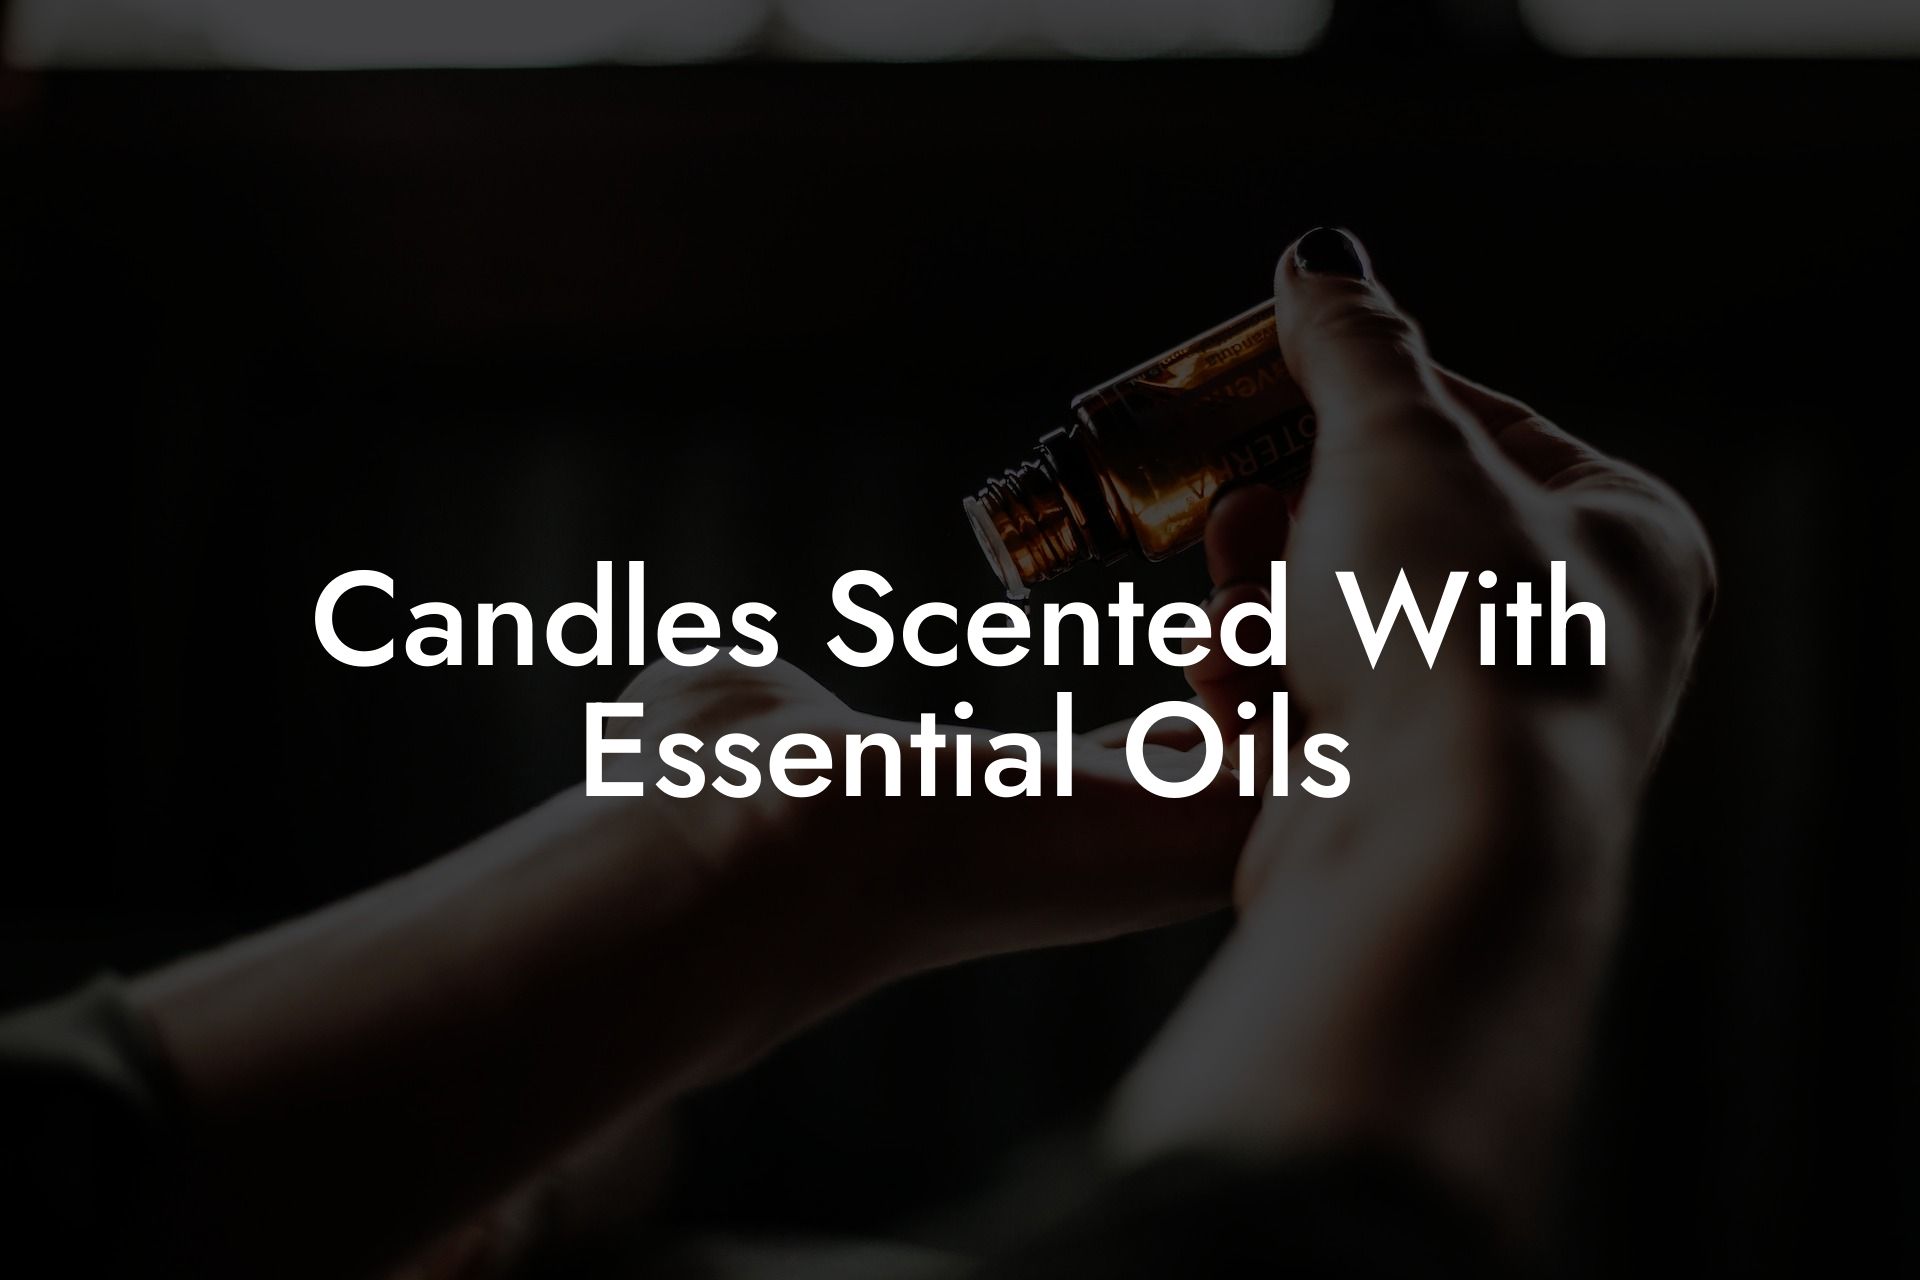 Candles Scented With Essential Oils